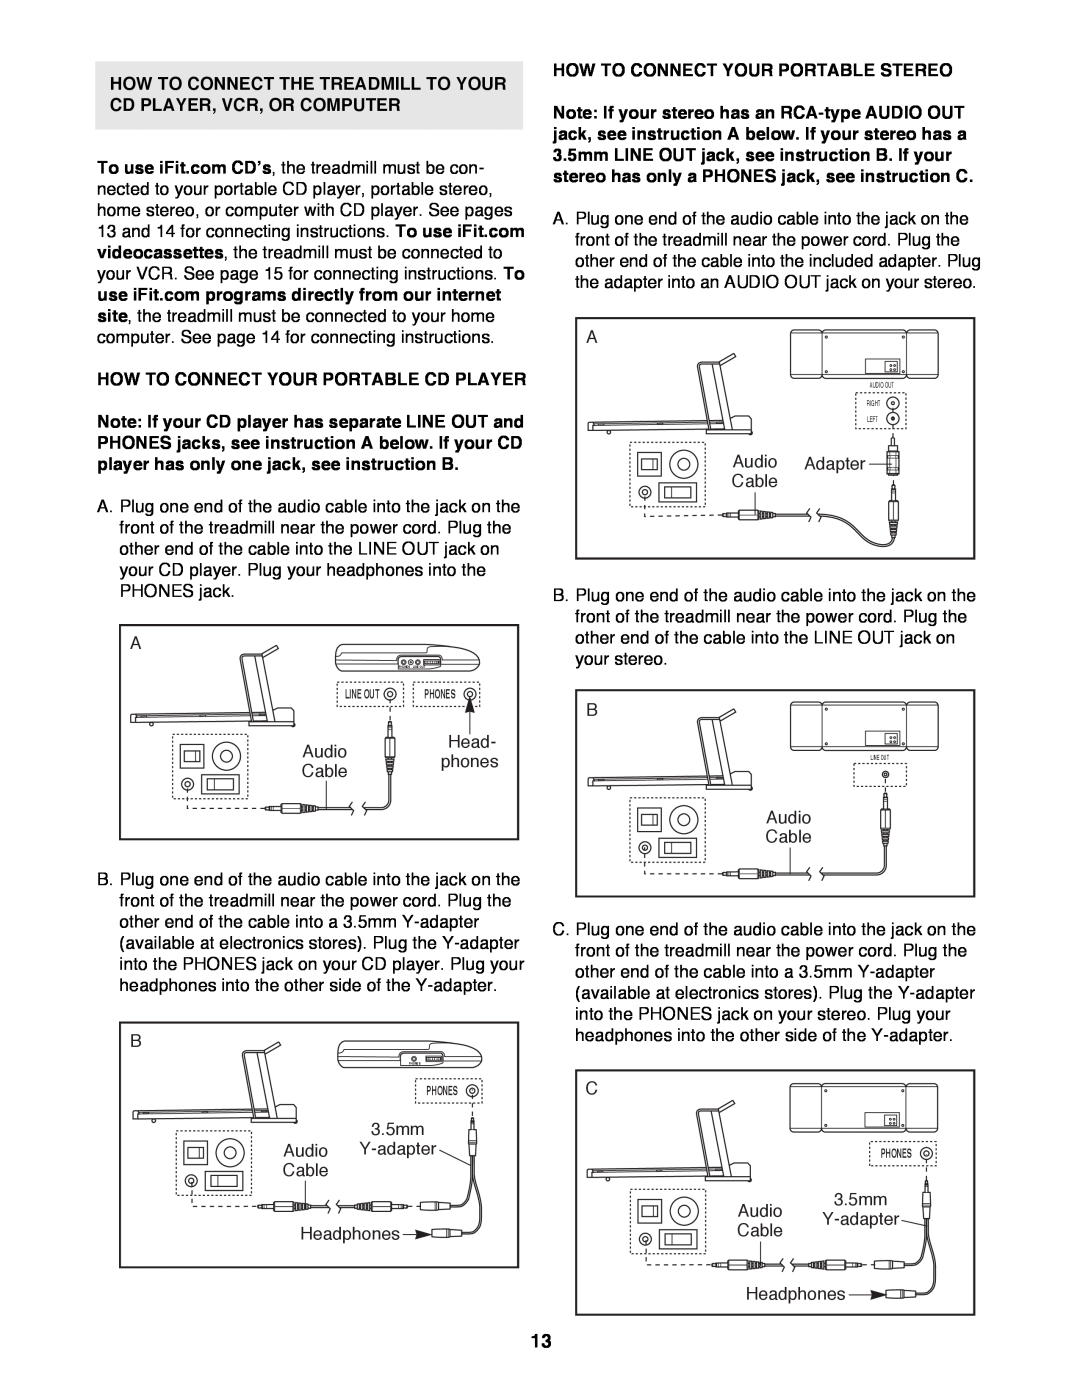 ProForm 785Pi How To Connect The Treadmill To Your Cd Player, Vcr, Or Computer, How To Connect Your Portable Cd Player 